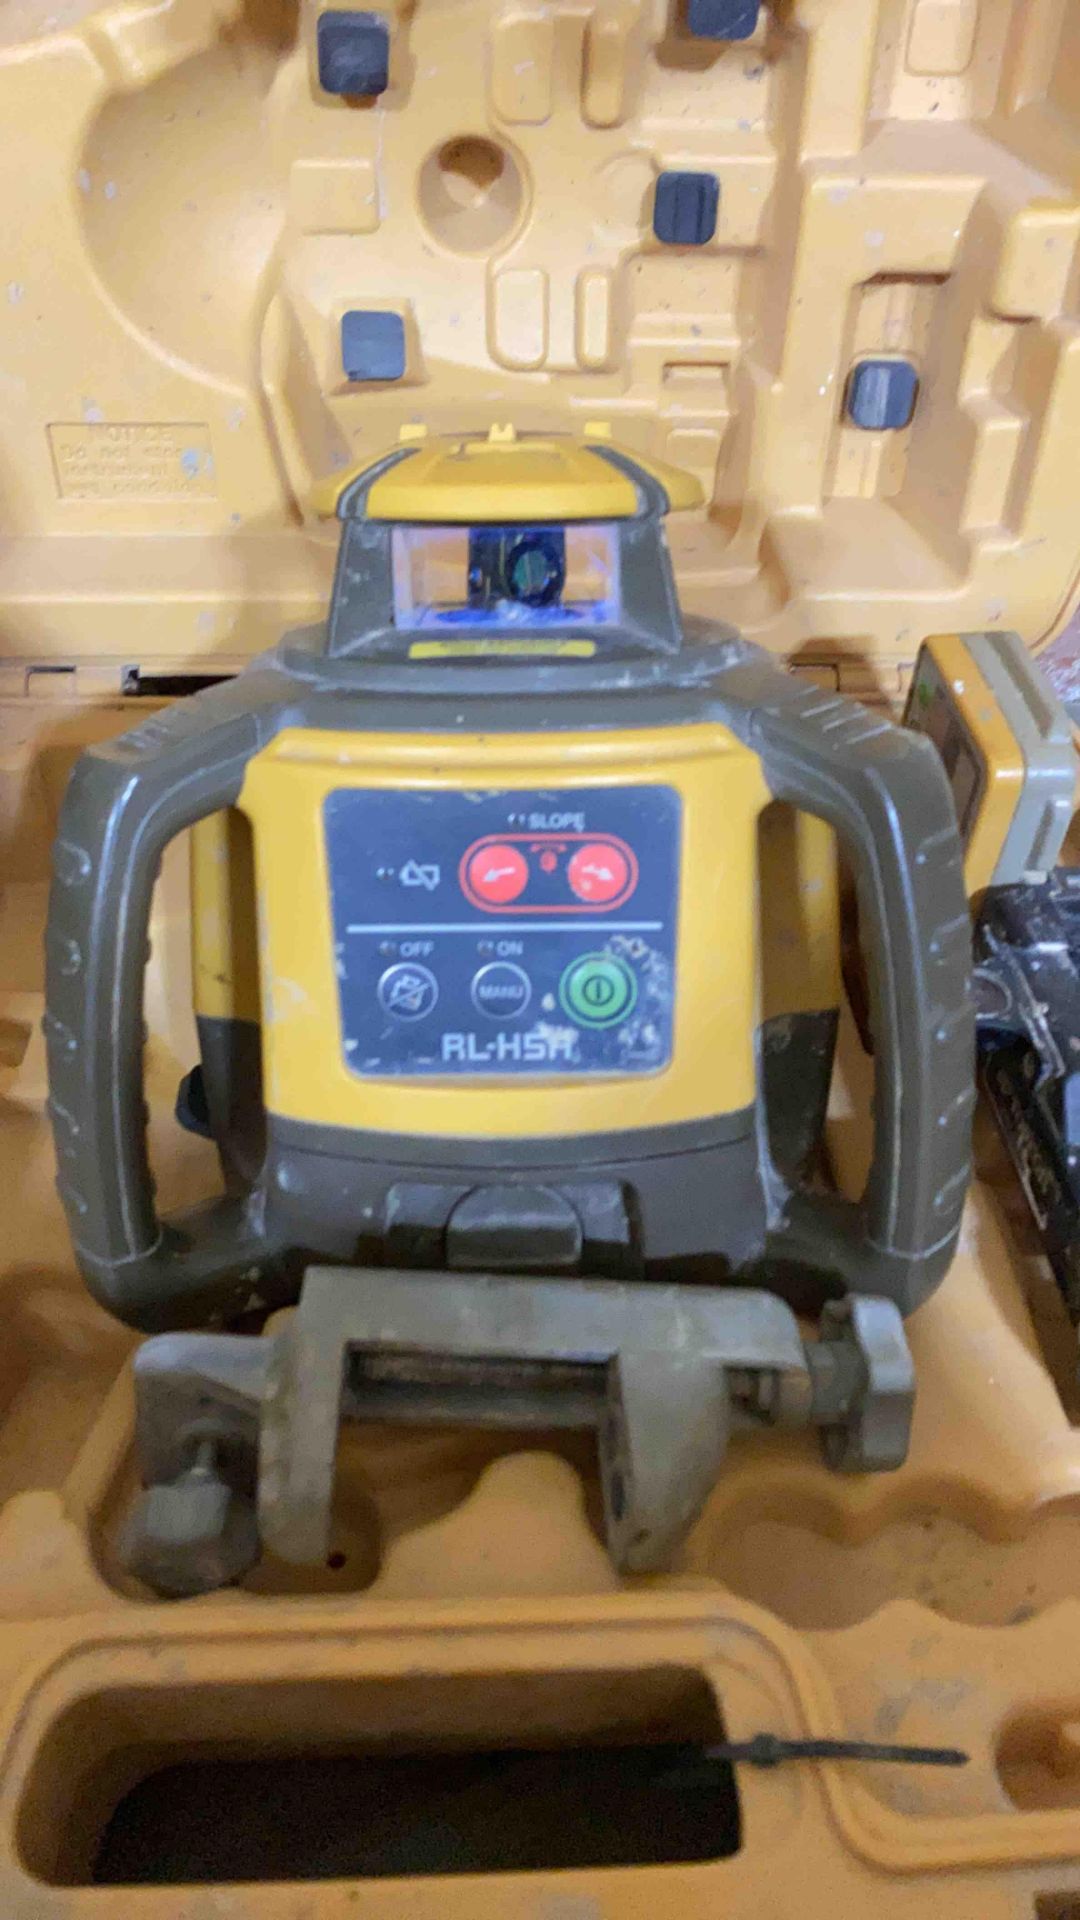 Topcon RL-H5 laser level complete with carry case and top con LS-80L handheld control - Image 3 of 4